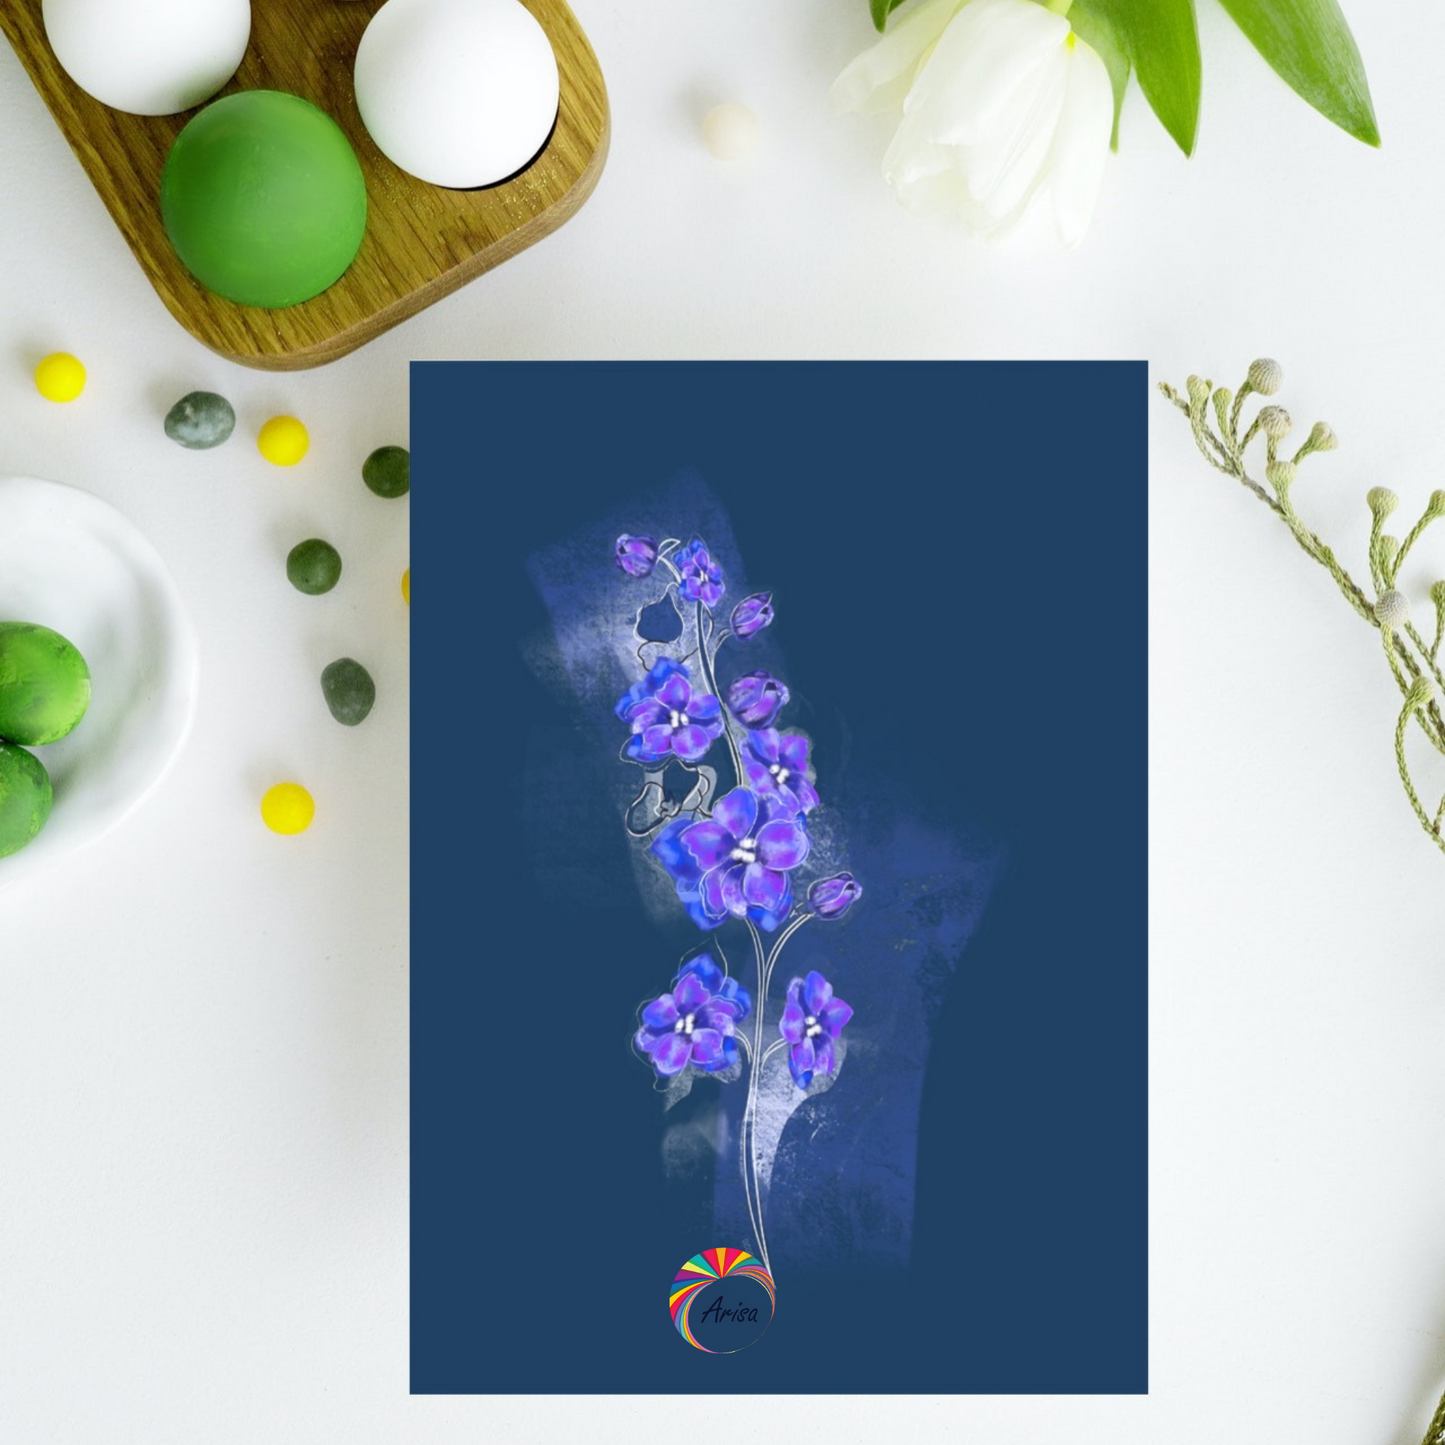 "LARKSPUR" Greeting Card by ArisaTeam ideal as an Easter card.